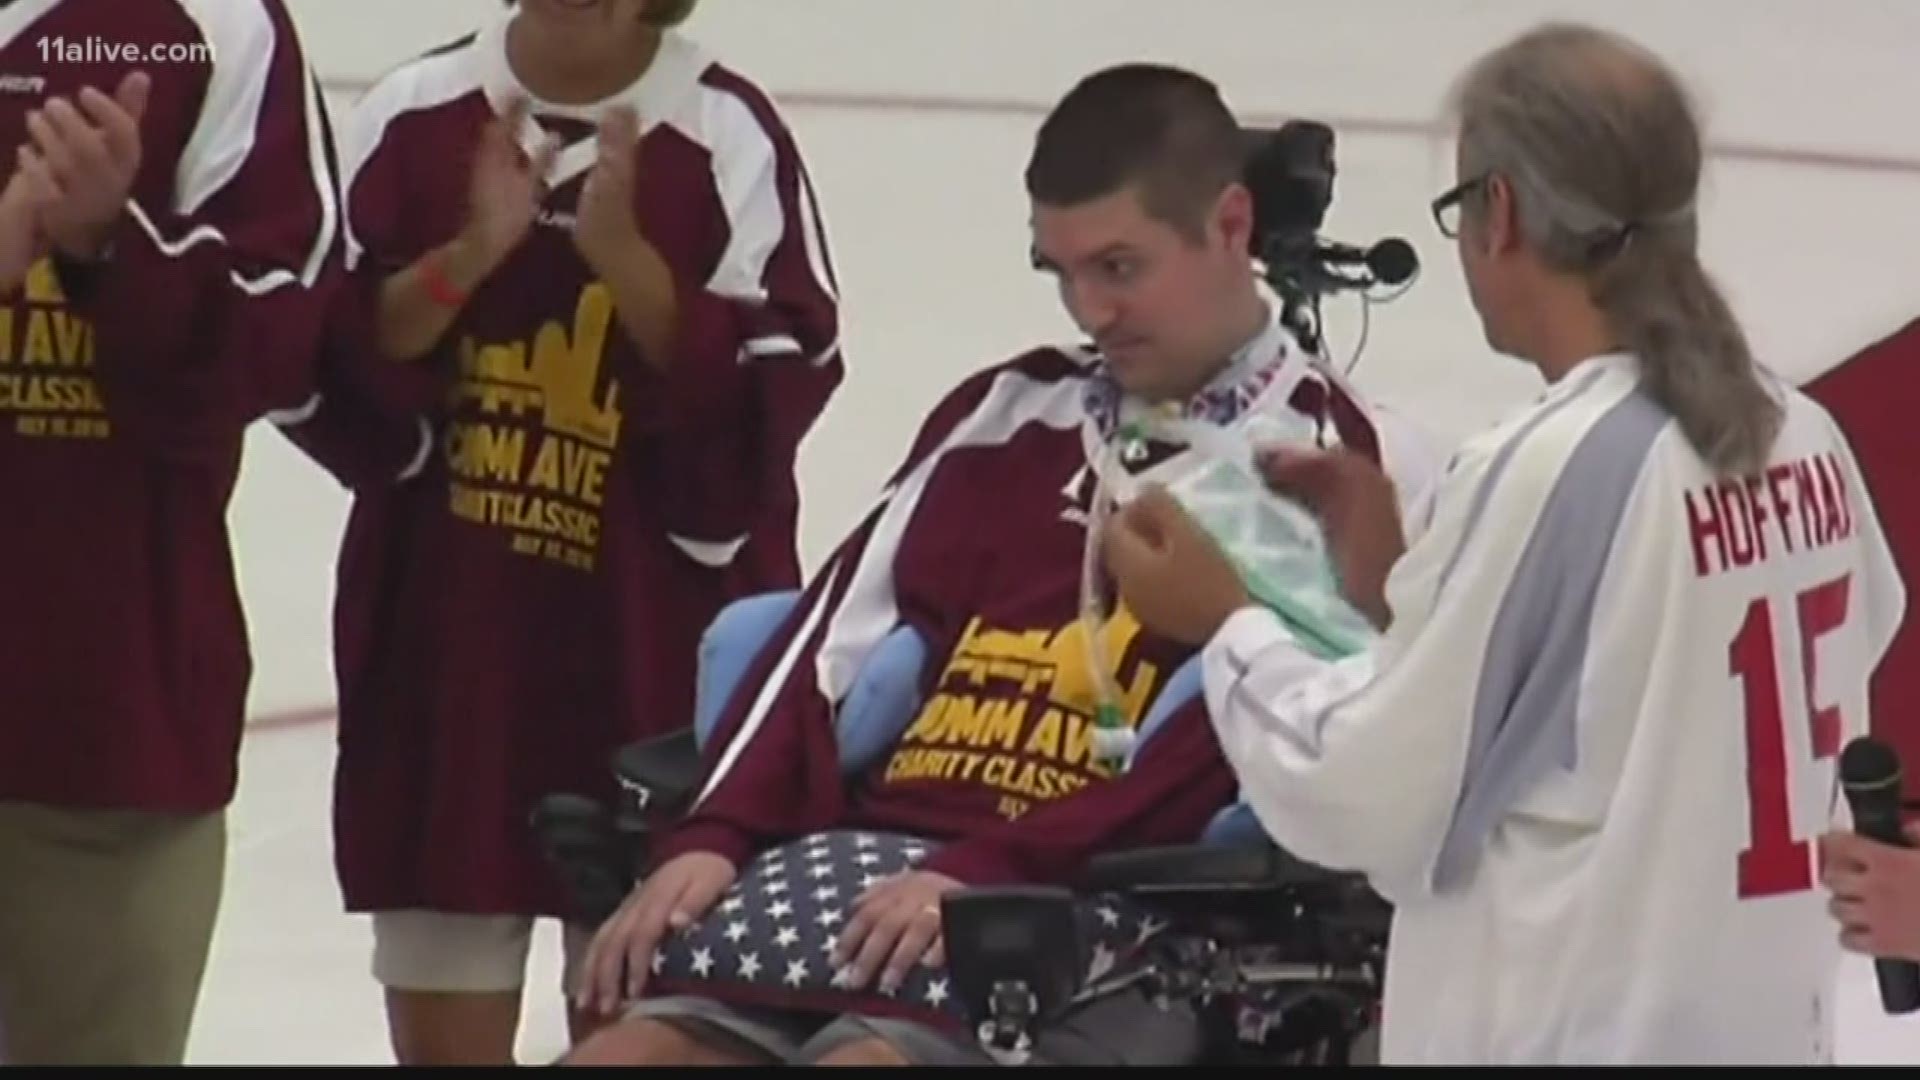 Pete Frates championed the viral 'Ice Bucket Challenge,' which raised $115 million for the ALS Association in the summer of 2014.